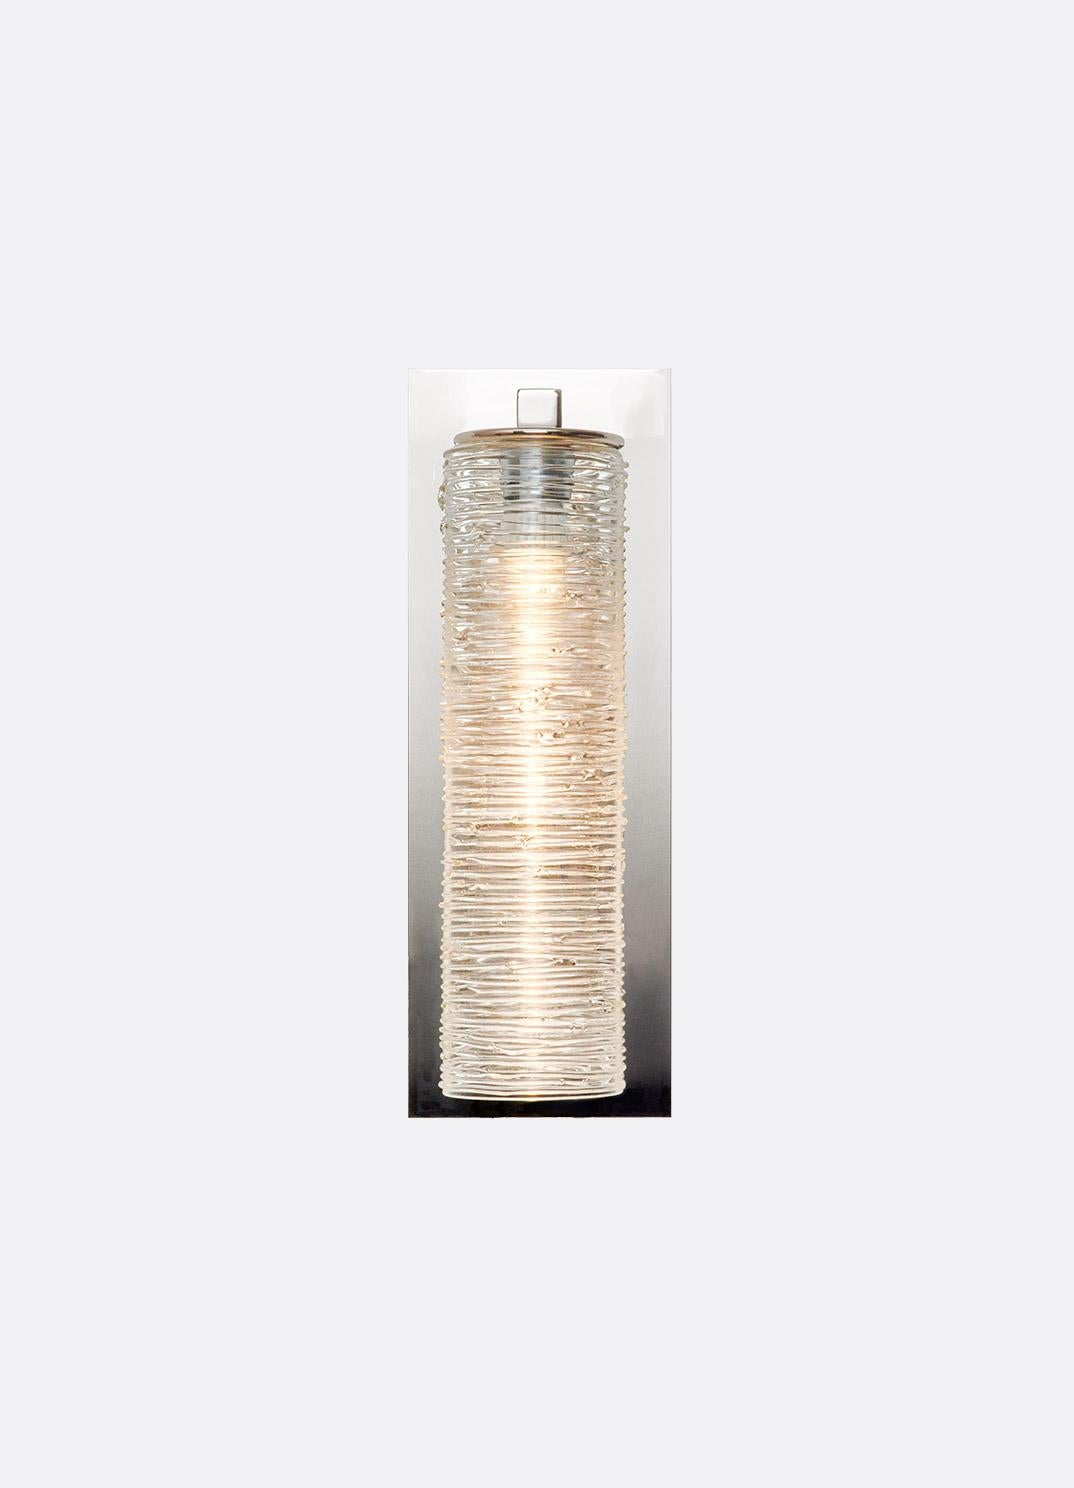 Rectangular wall sconce with arm with circular smooth edged disk holding the top of the glass pendant. Floating style back plate (6